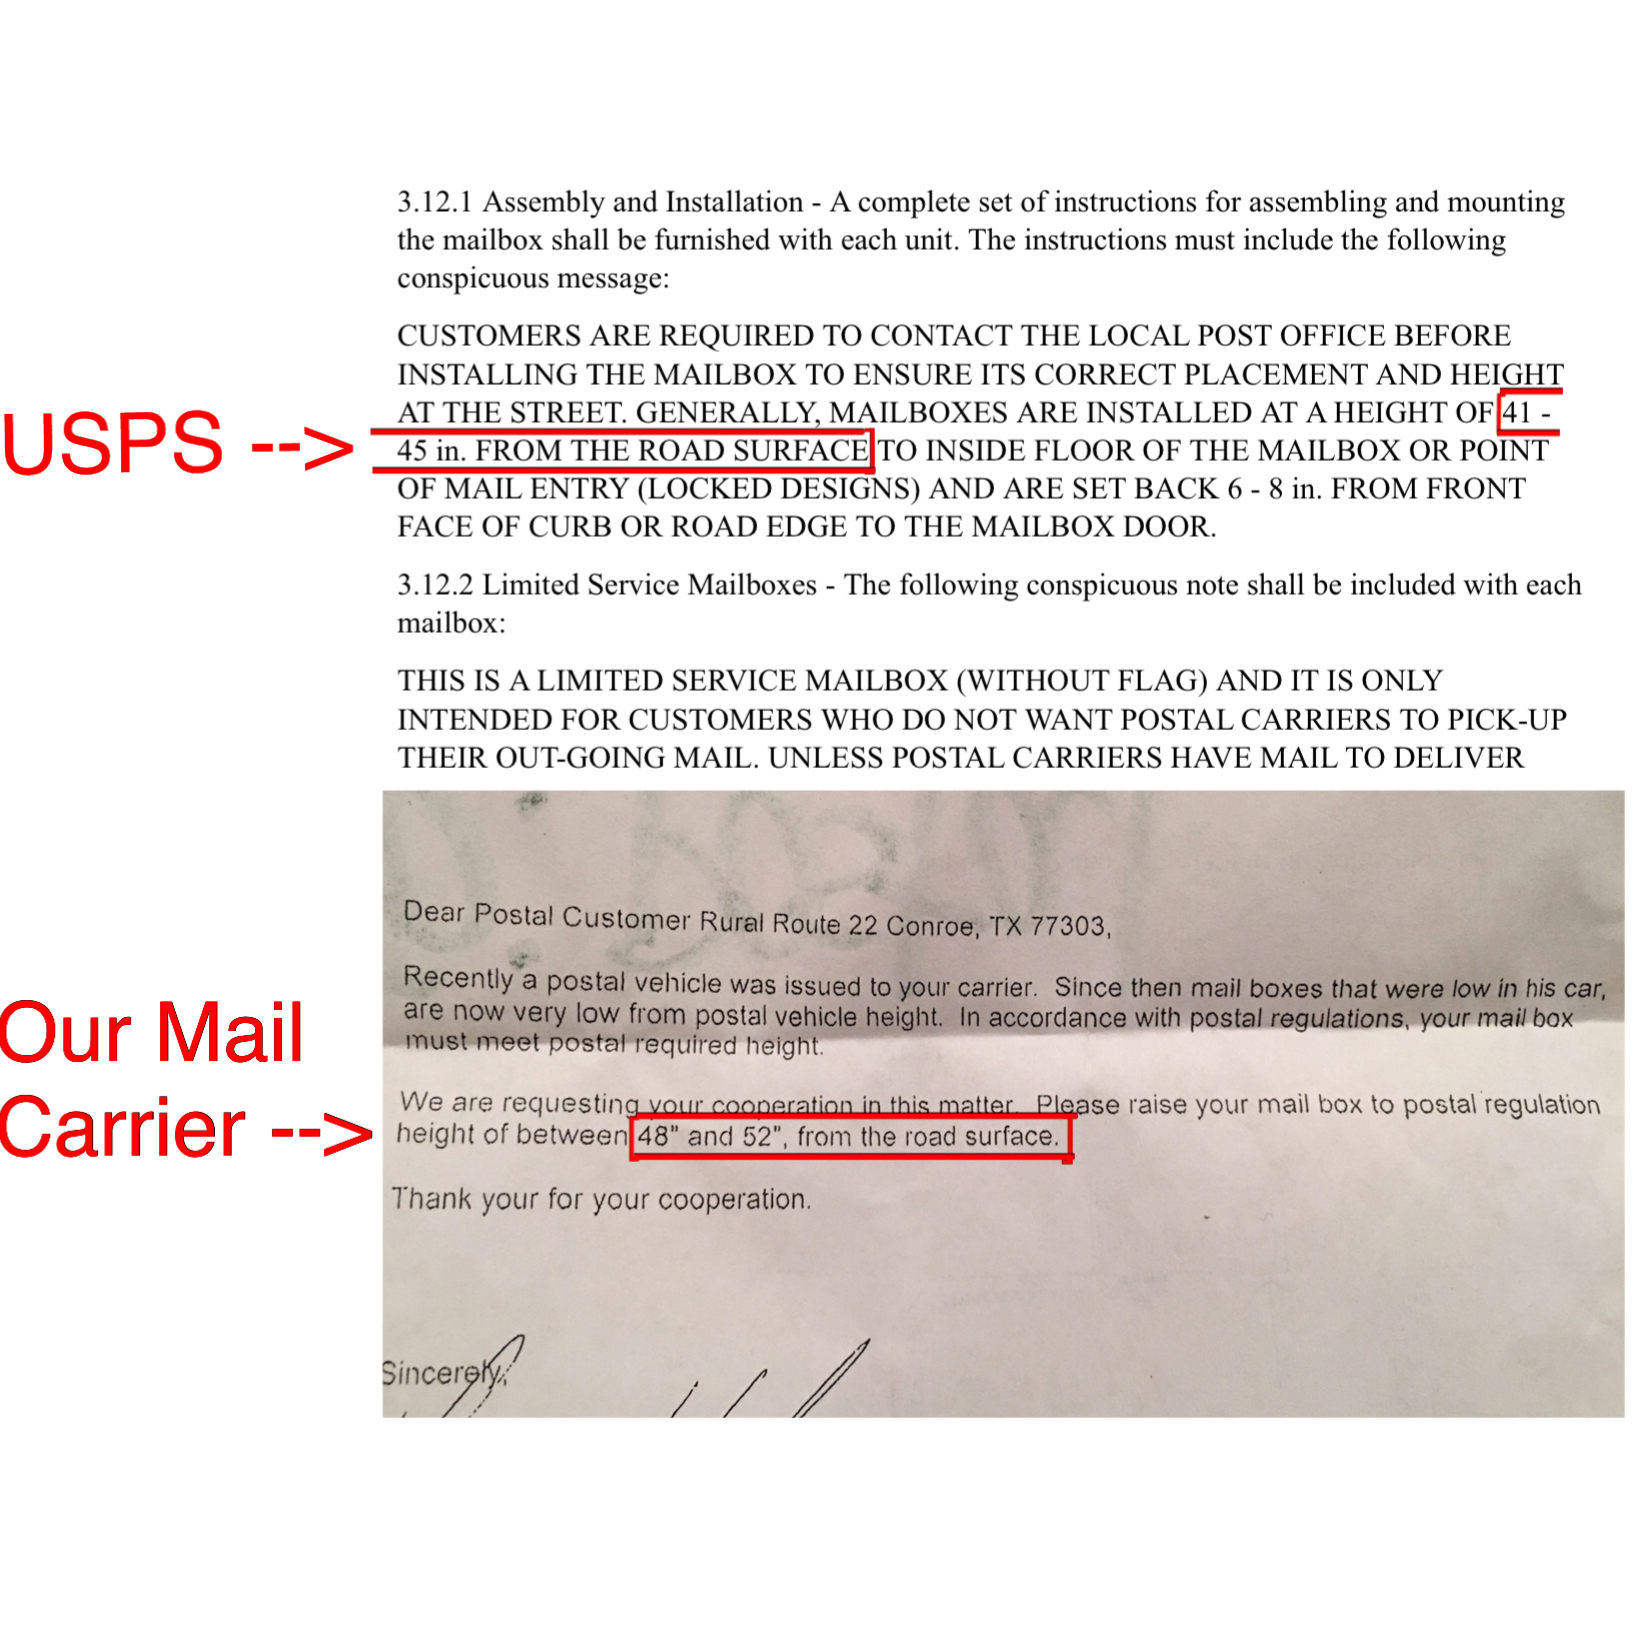 USPS Regulations vs Our Mail Carriers version